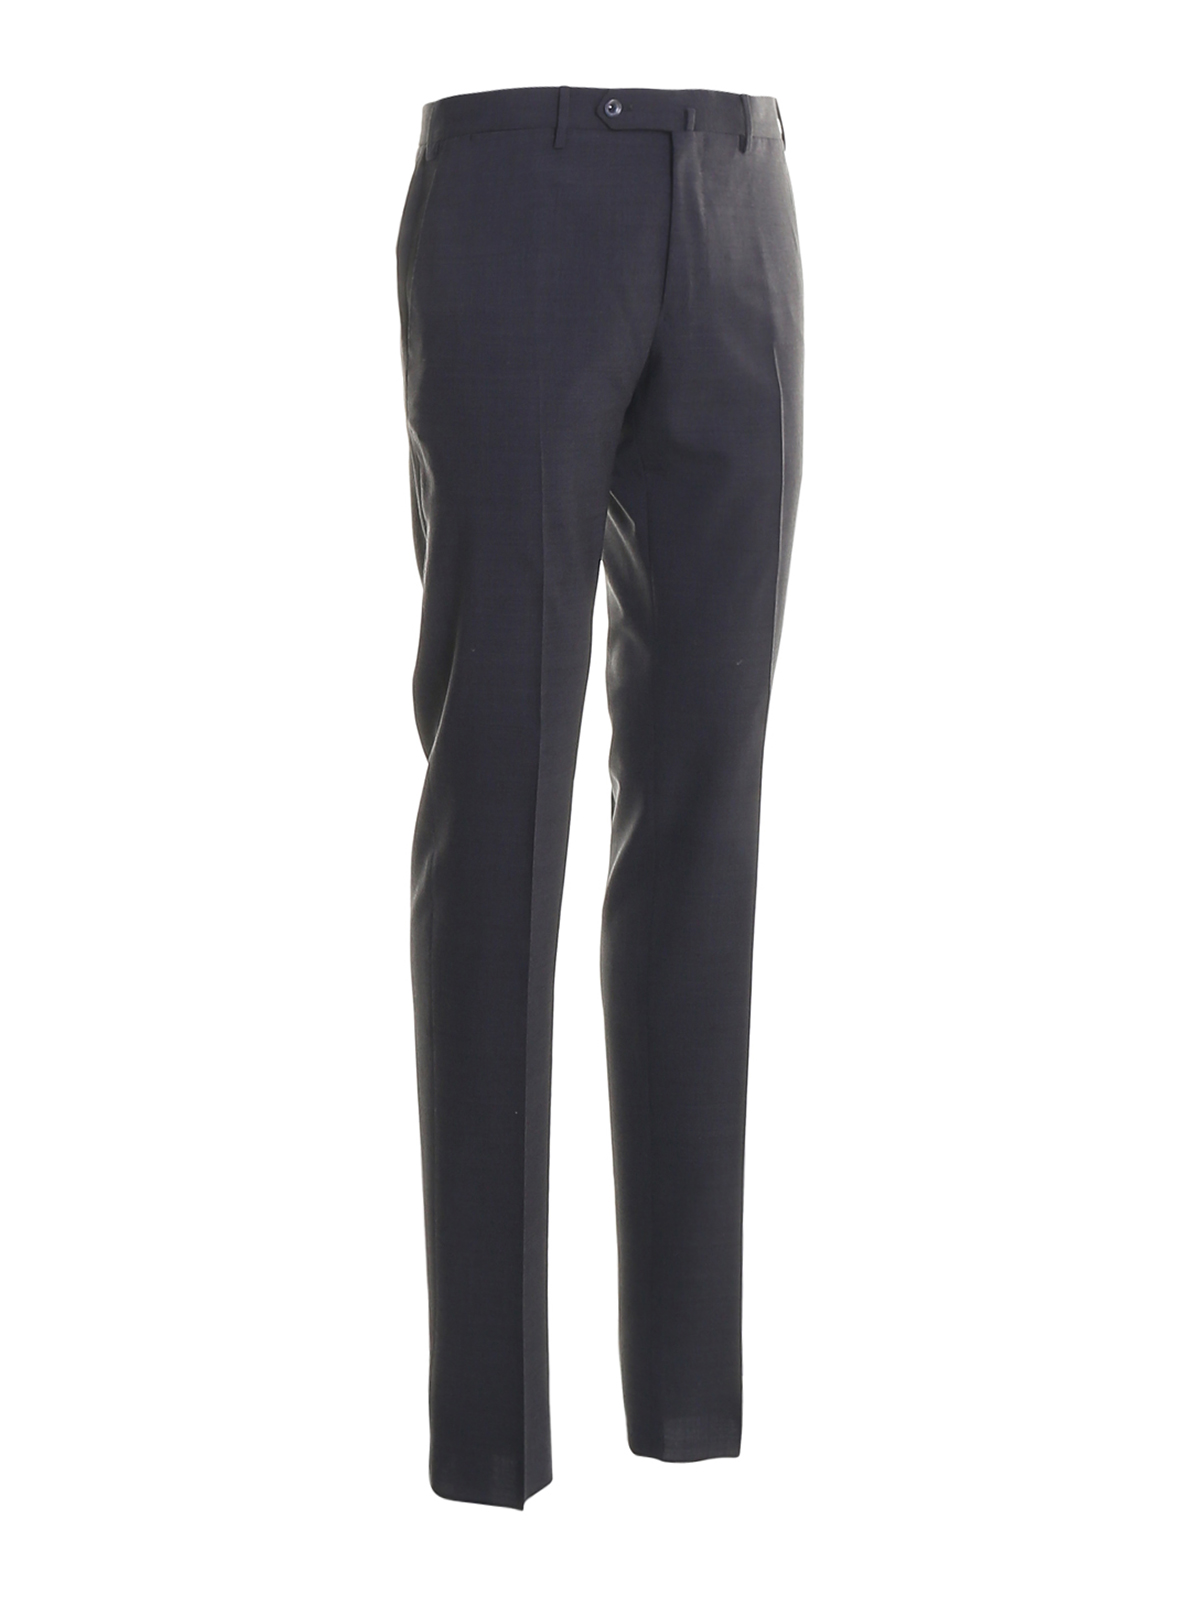 Tailored & Formal trousers Pt Torino - Washable wool tailored pants ...